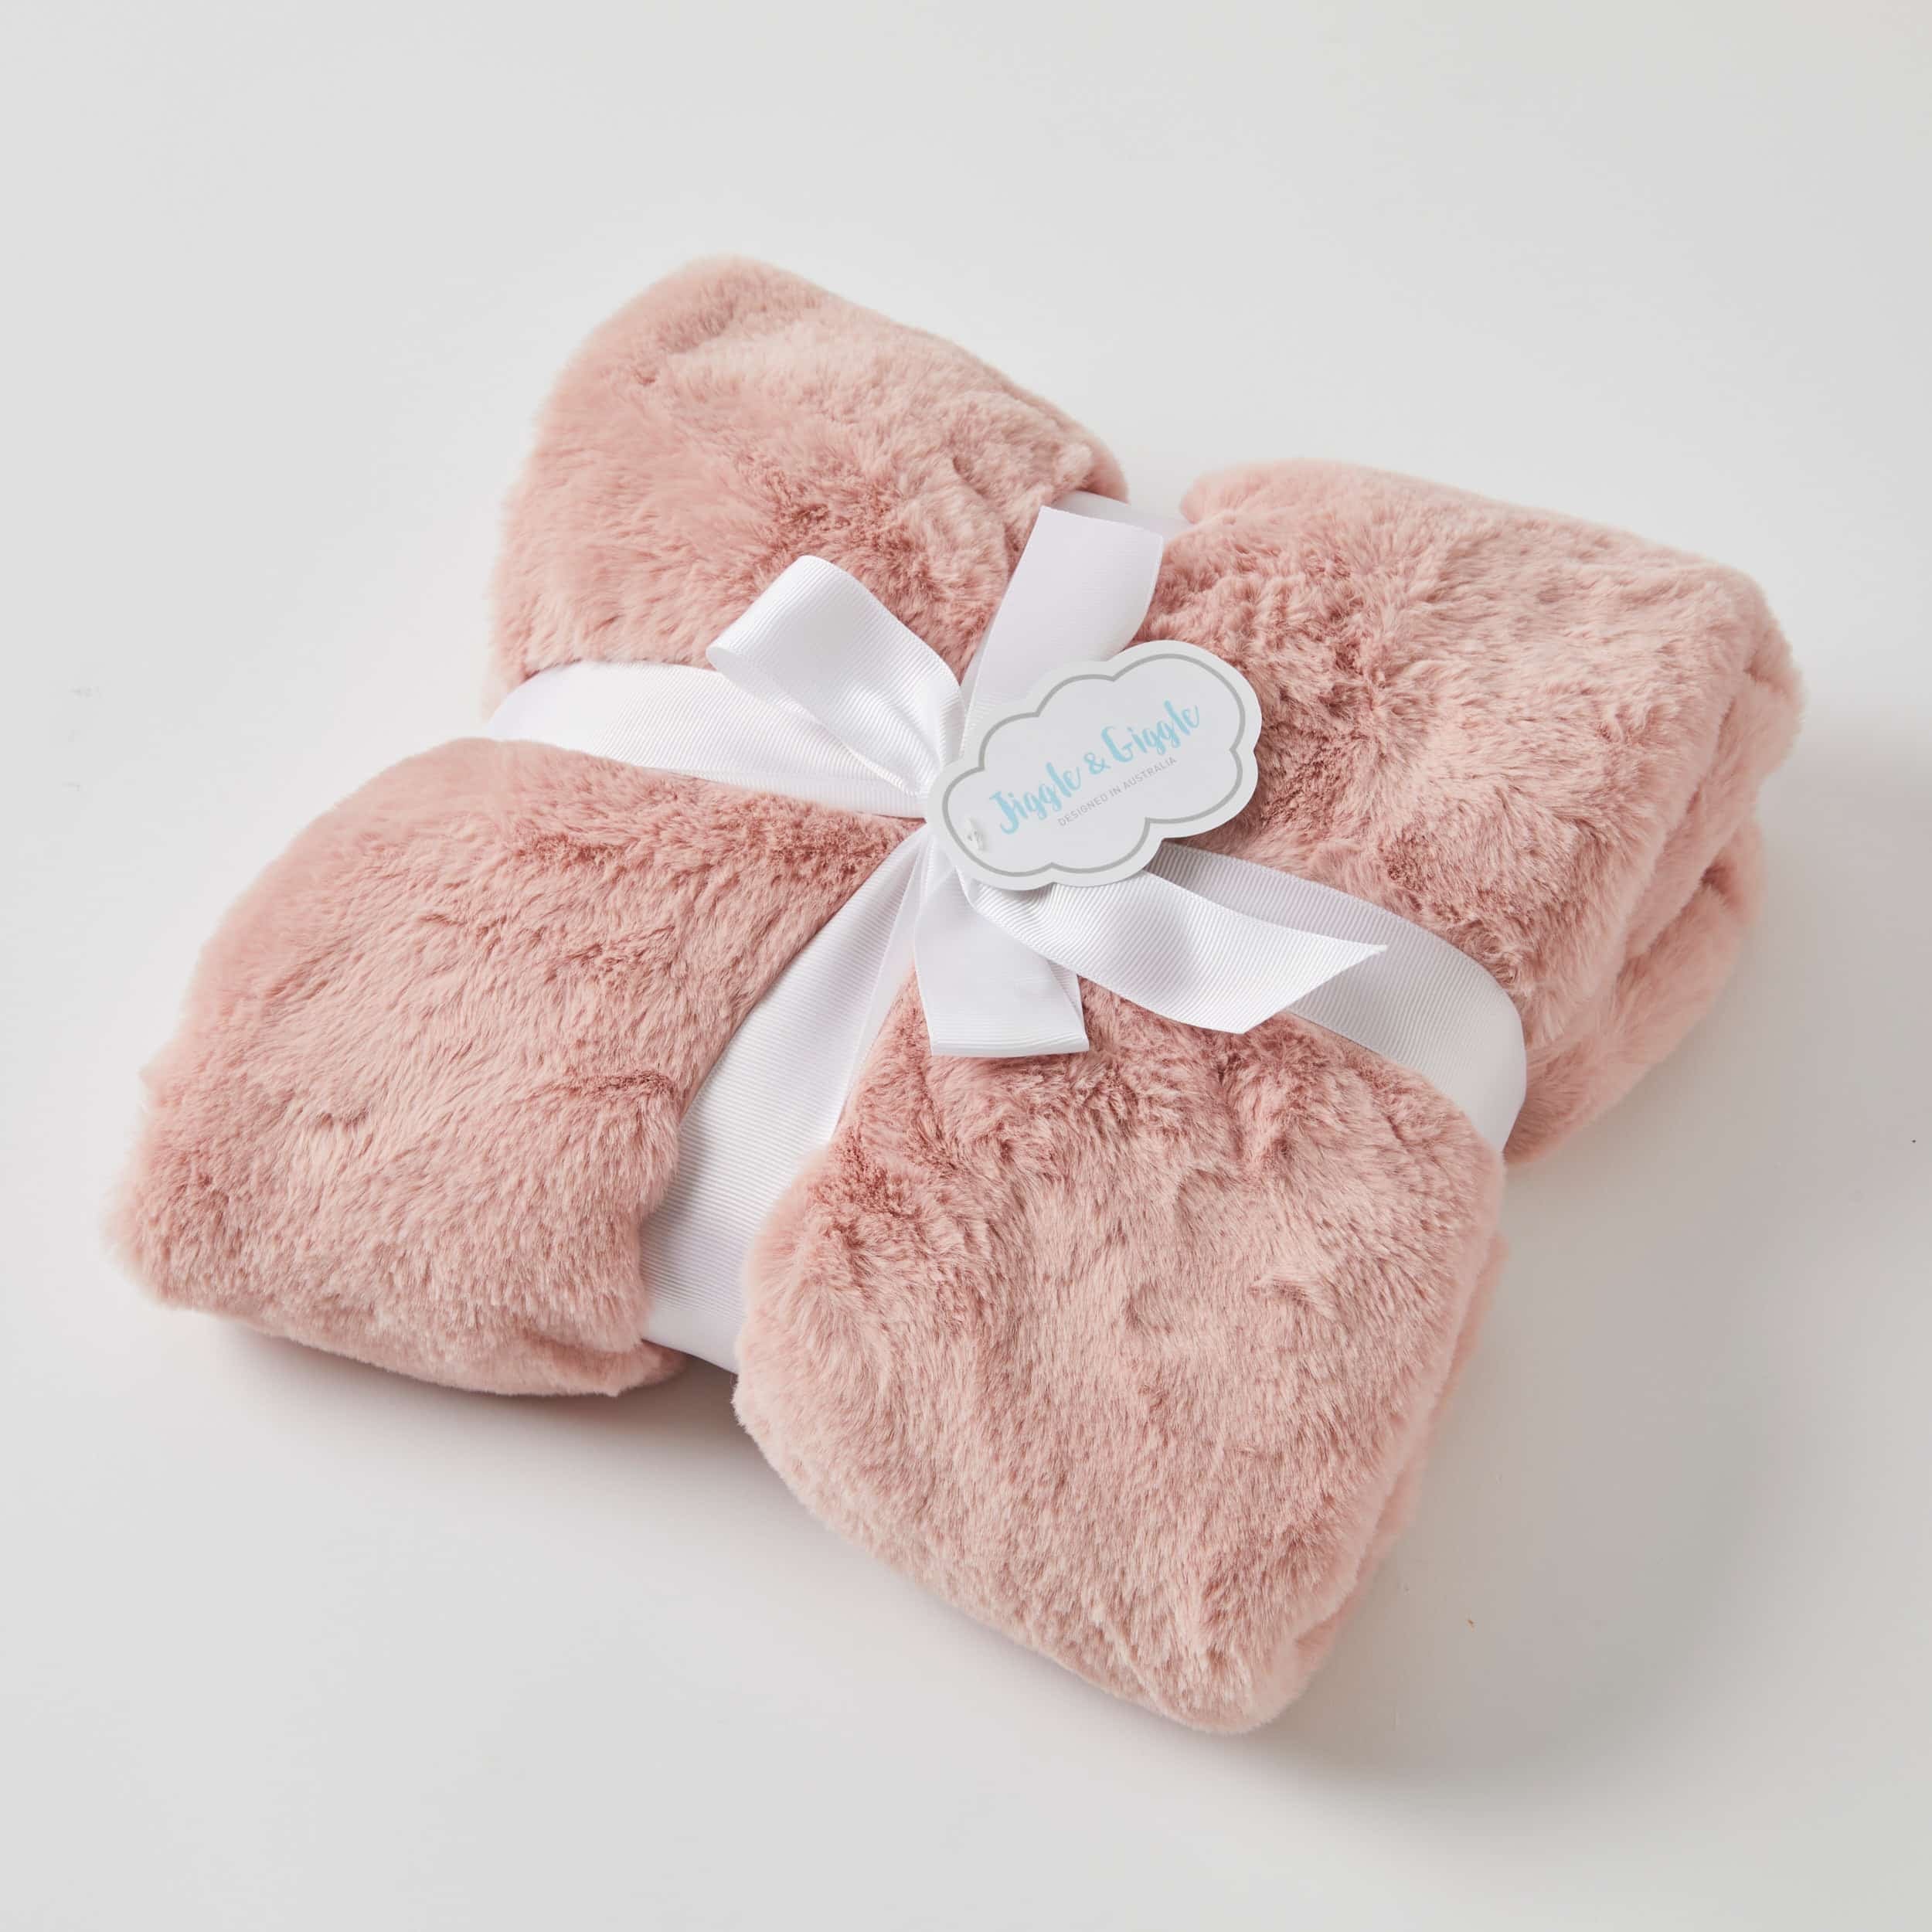 Faux Fur Pink Blanket for baby. Shop all Pilbeam now at Sticky Fingers Children's boutique, Niddrie, Melbourne